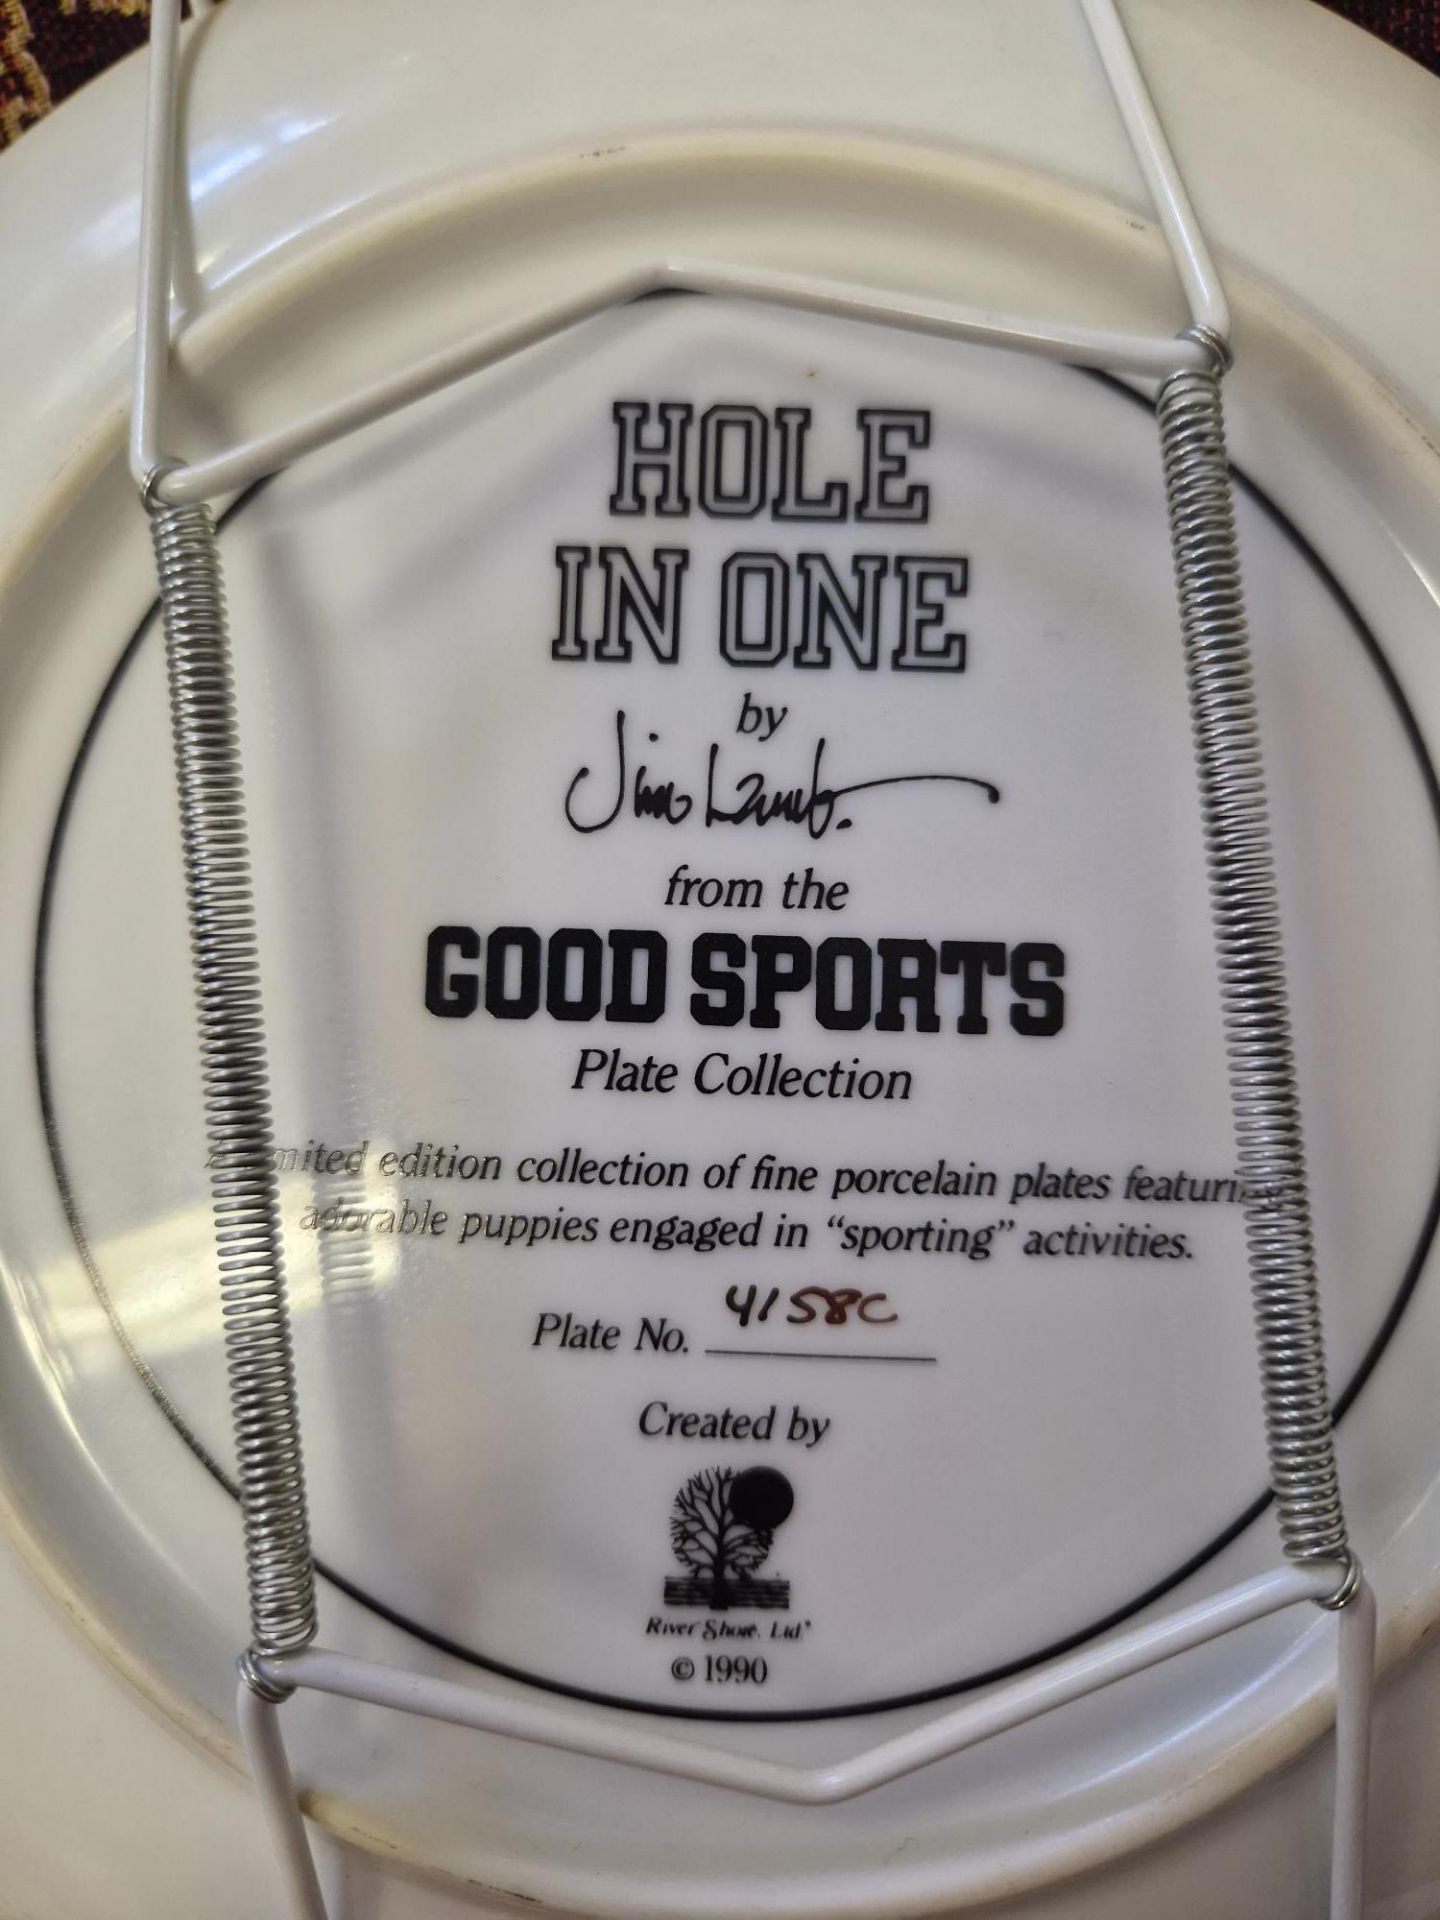 Good sports - hole in one plate - Image 2 of 2